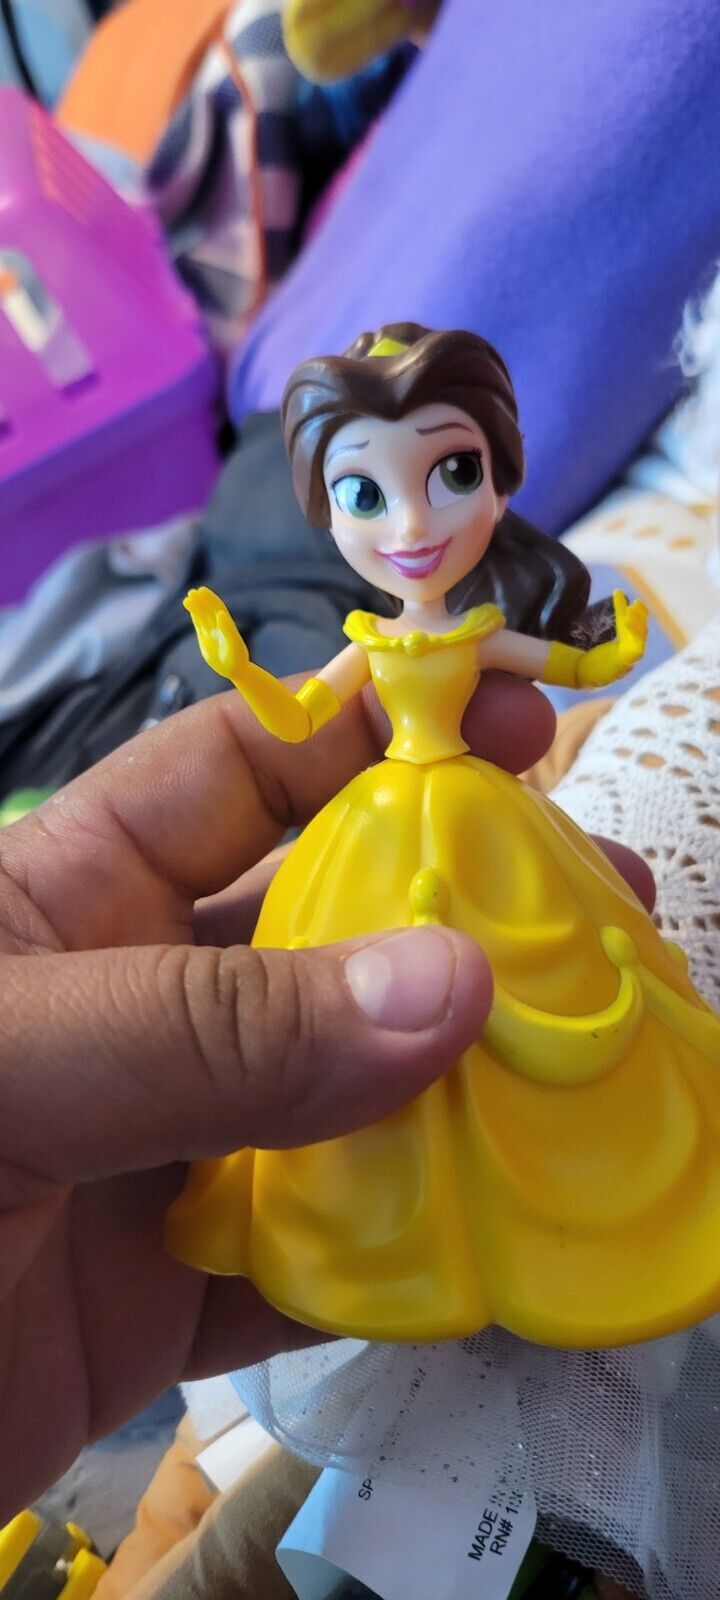 BELLE DISNEY BEAUTY AND THE BEAST 5” ACTION FIGURE PLASTIC TOY DOLL